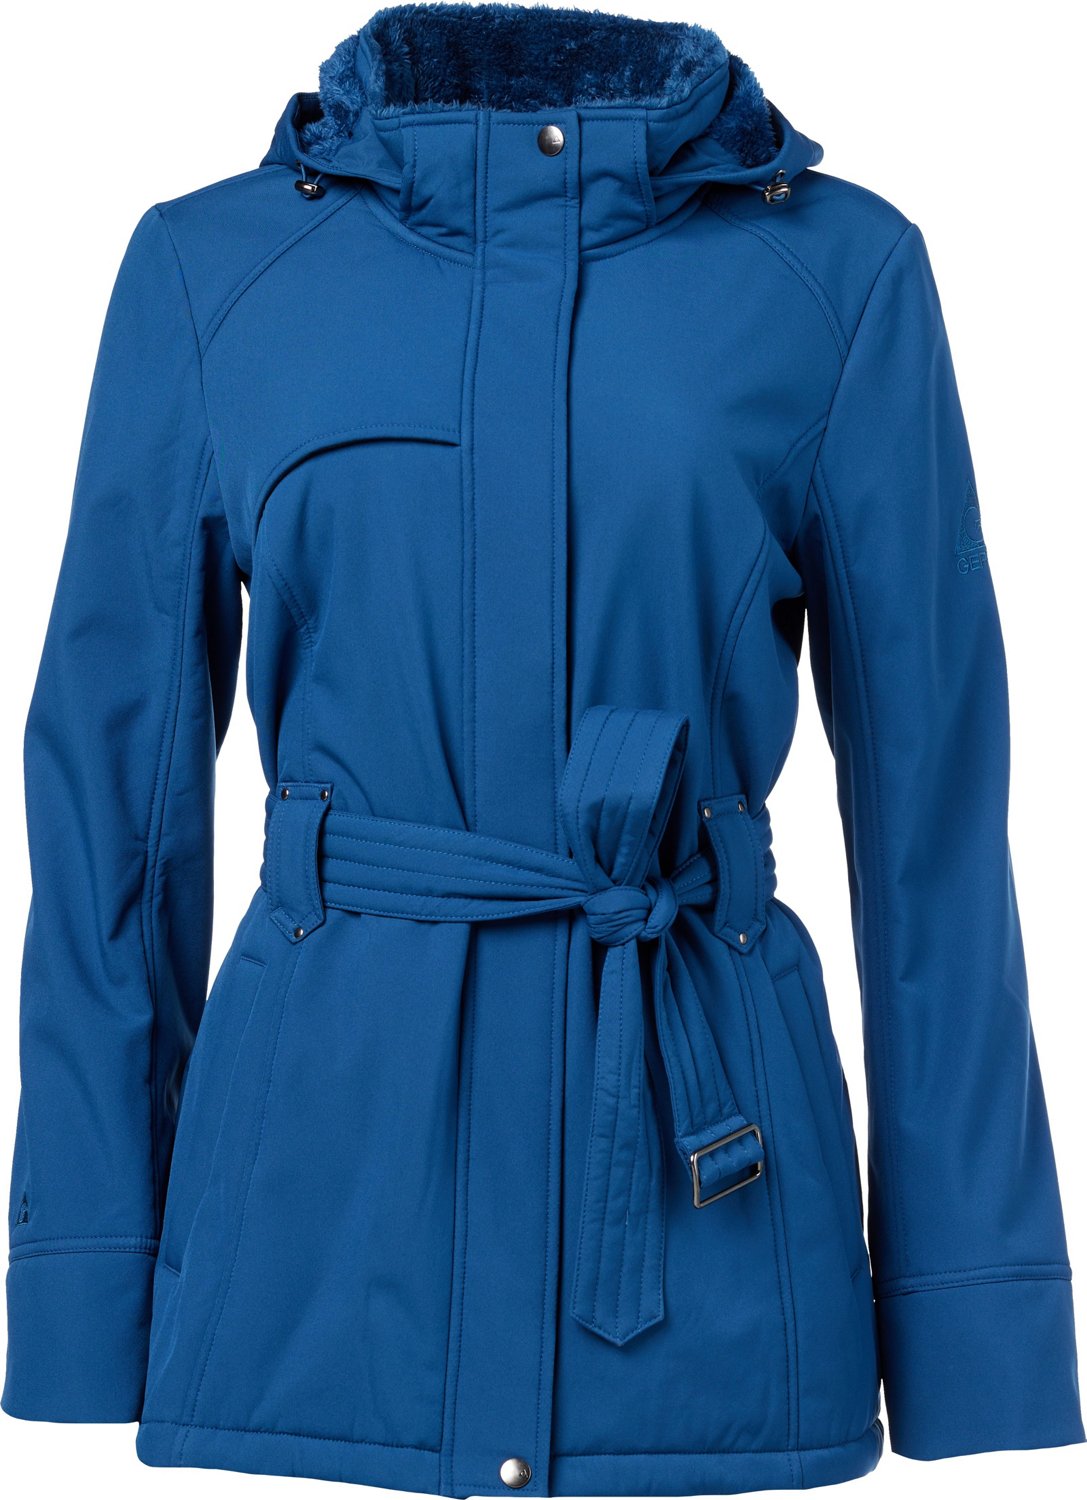 Gerry Women's Wintery Softshell Jacket | Free Shipping at Academy